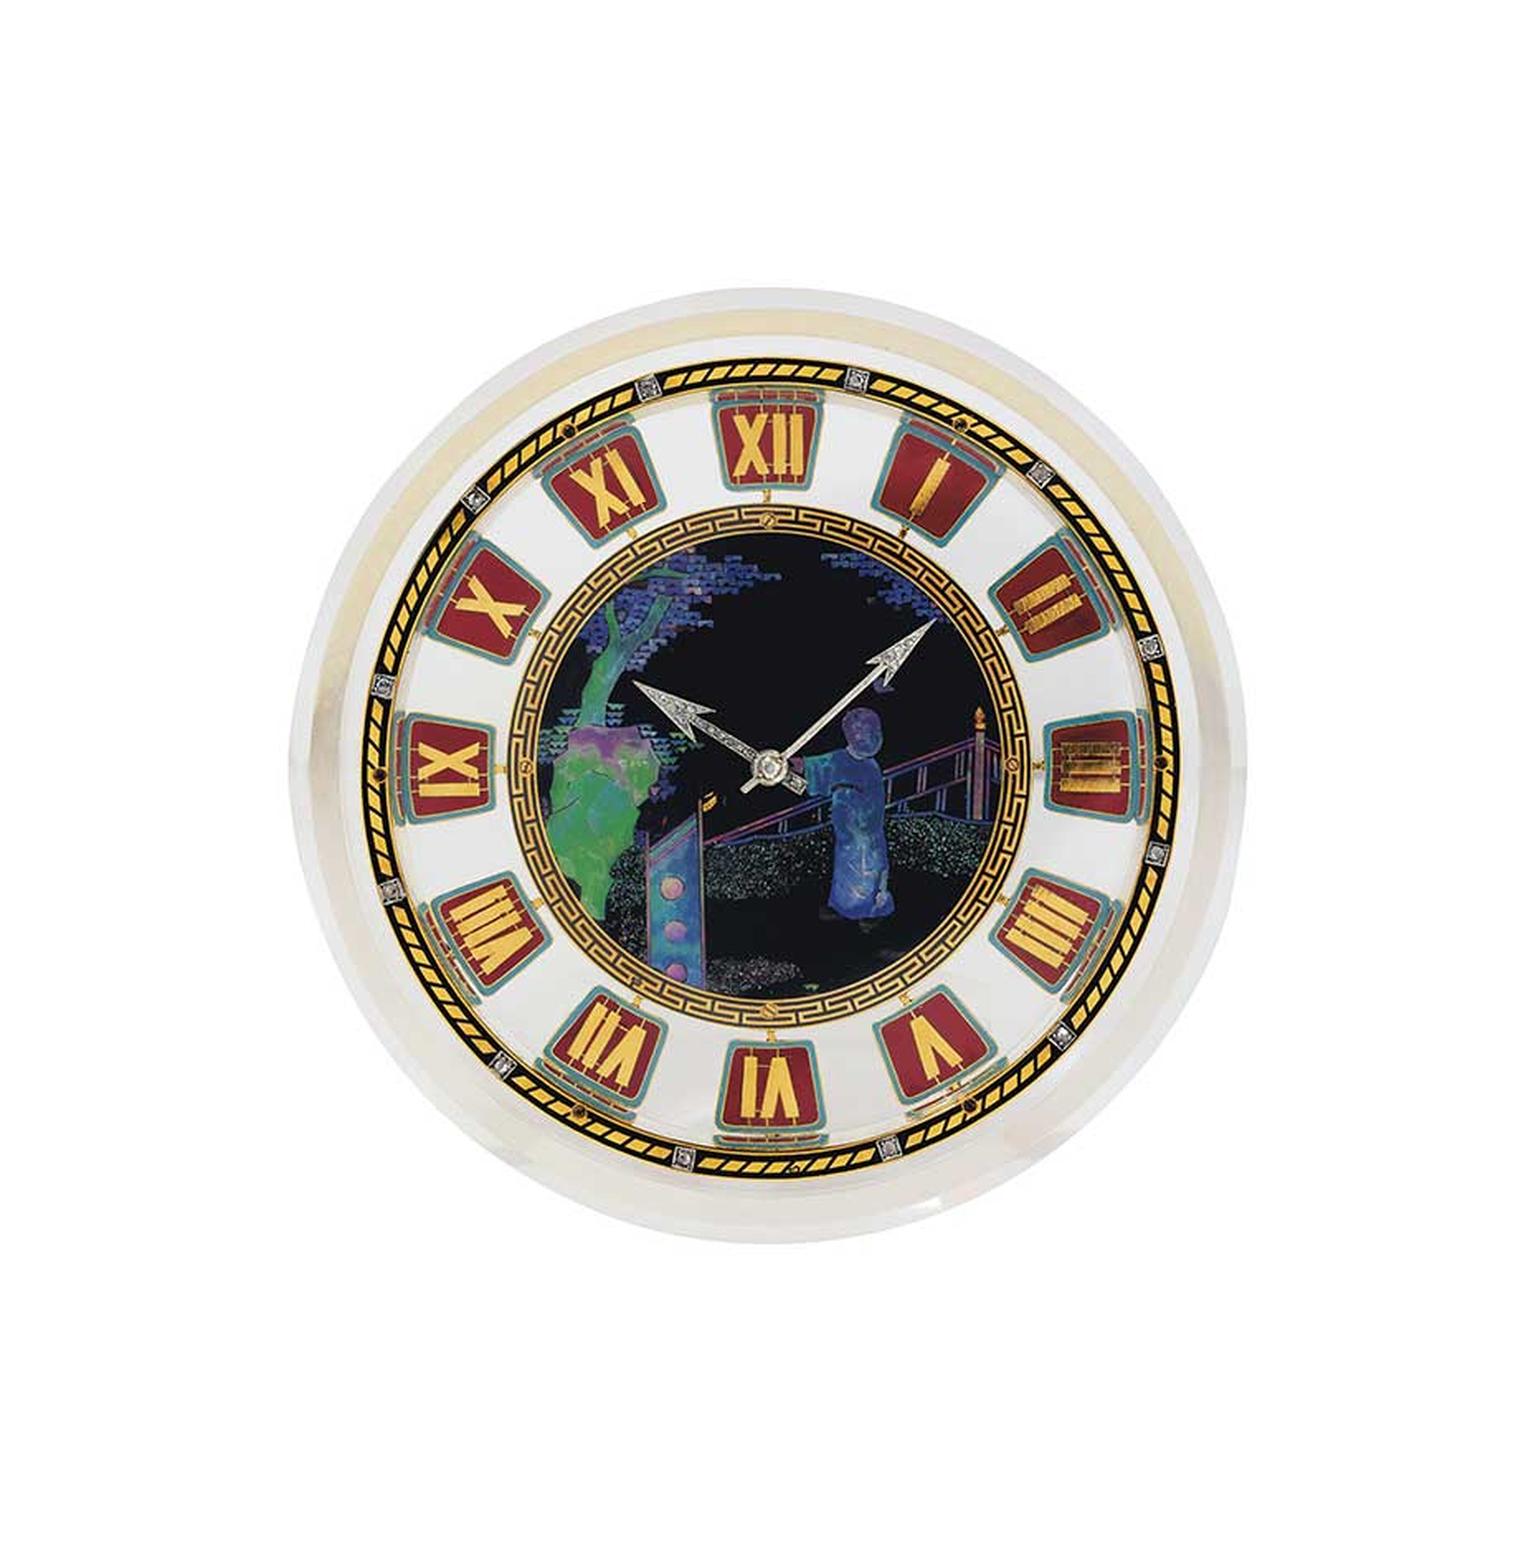 Lot 239 is a stylish Cartier clock dating from circa 1925 crafted from rock crystal, enamel, mother-of-pearl and diamonds (estimate: £40,000-60,000). Christie's Important Jewels Sale on 26 November at King Street in London.